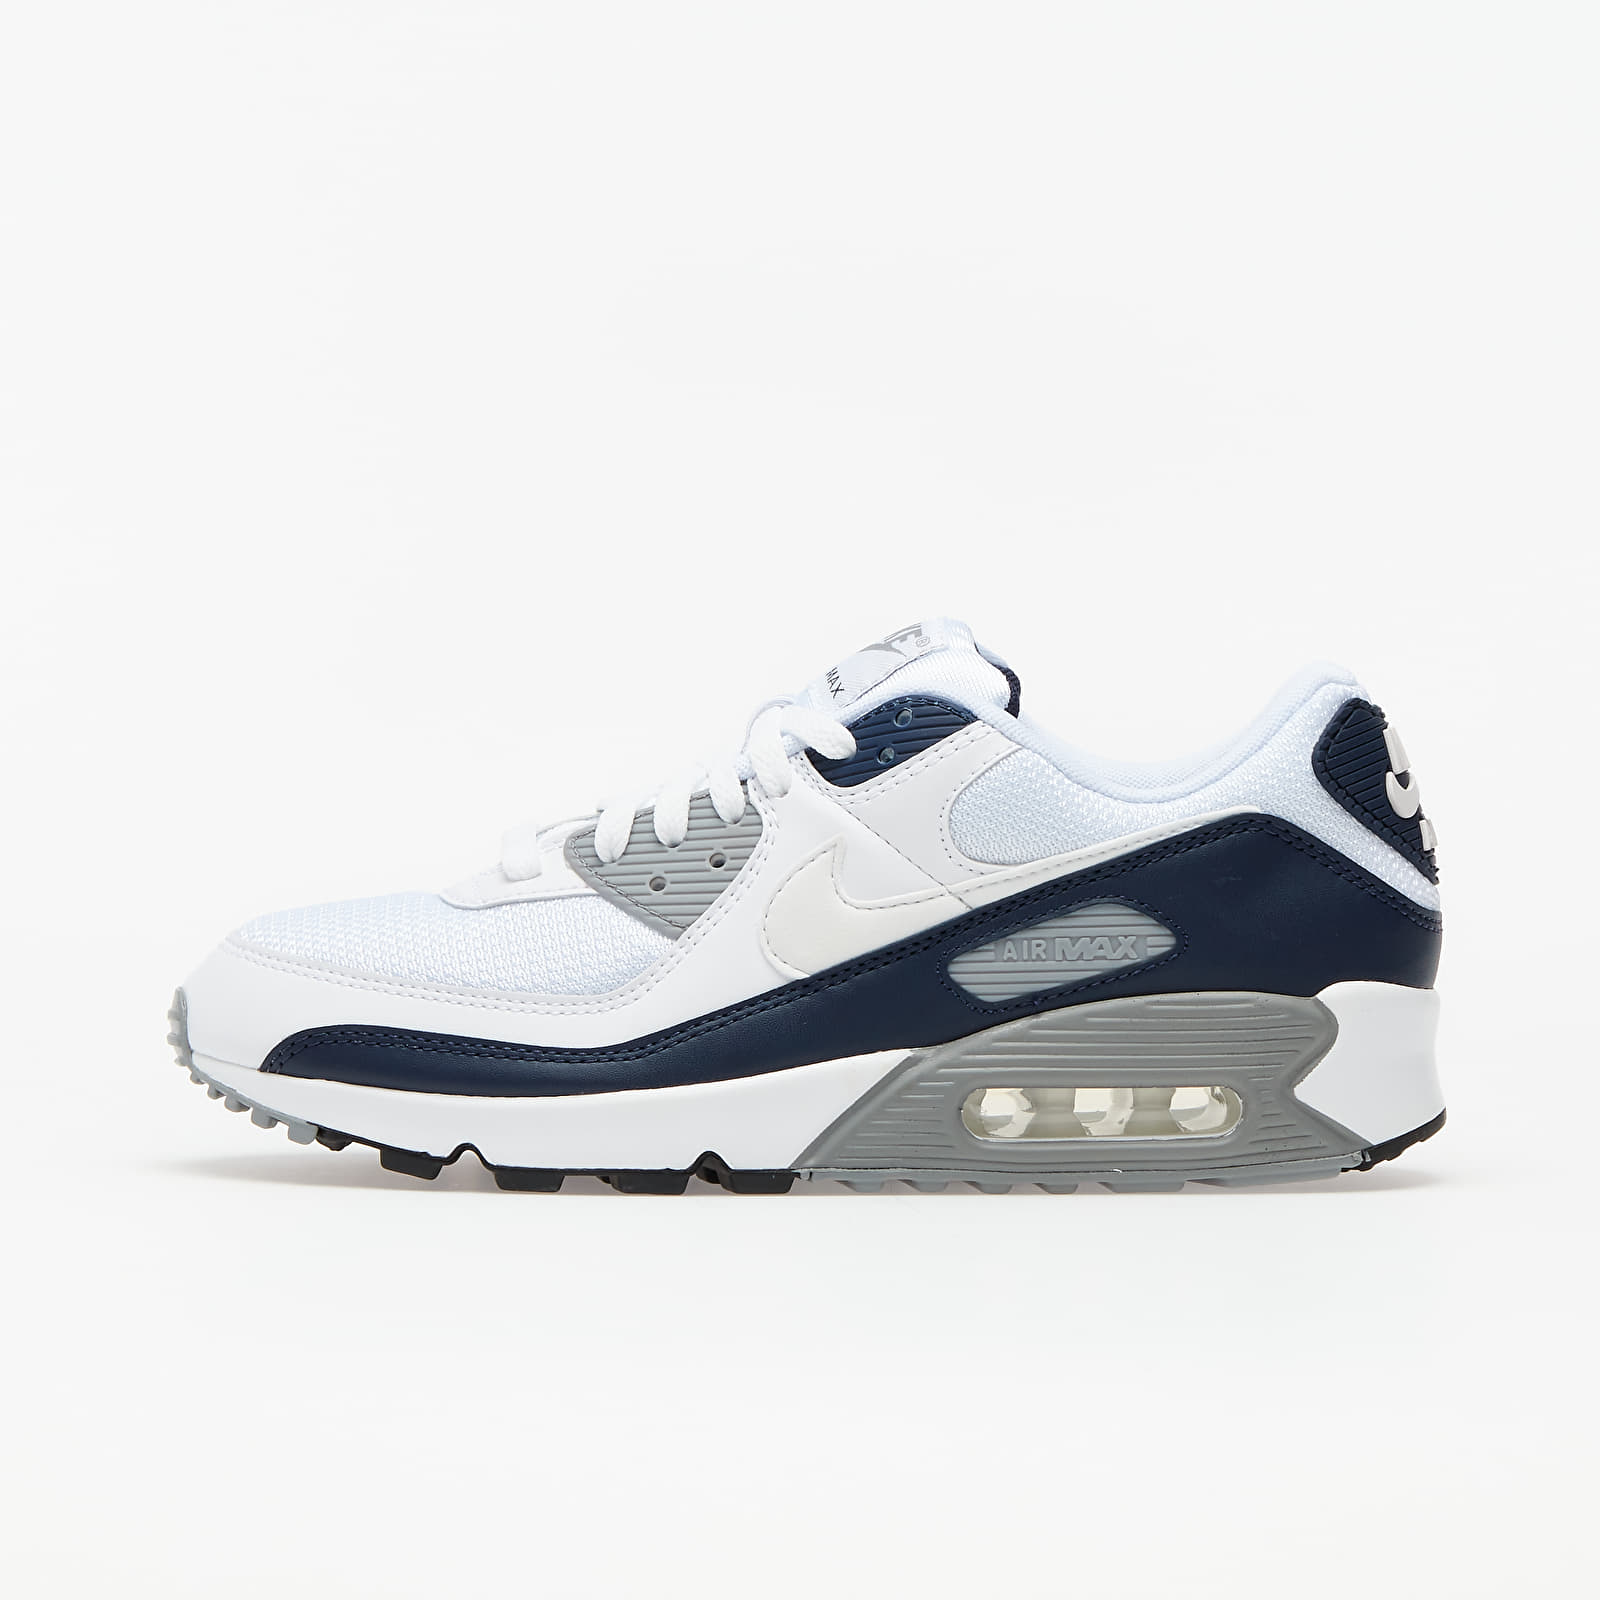 Men's shoes Nike Air Max 90 White/ White-Particle Grey-Obsidian